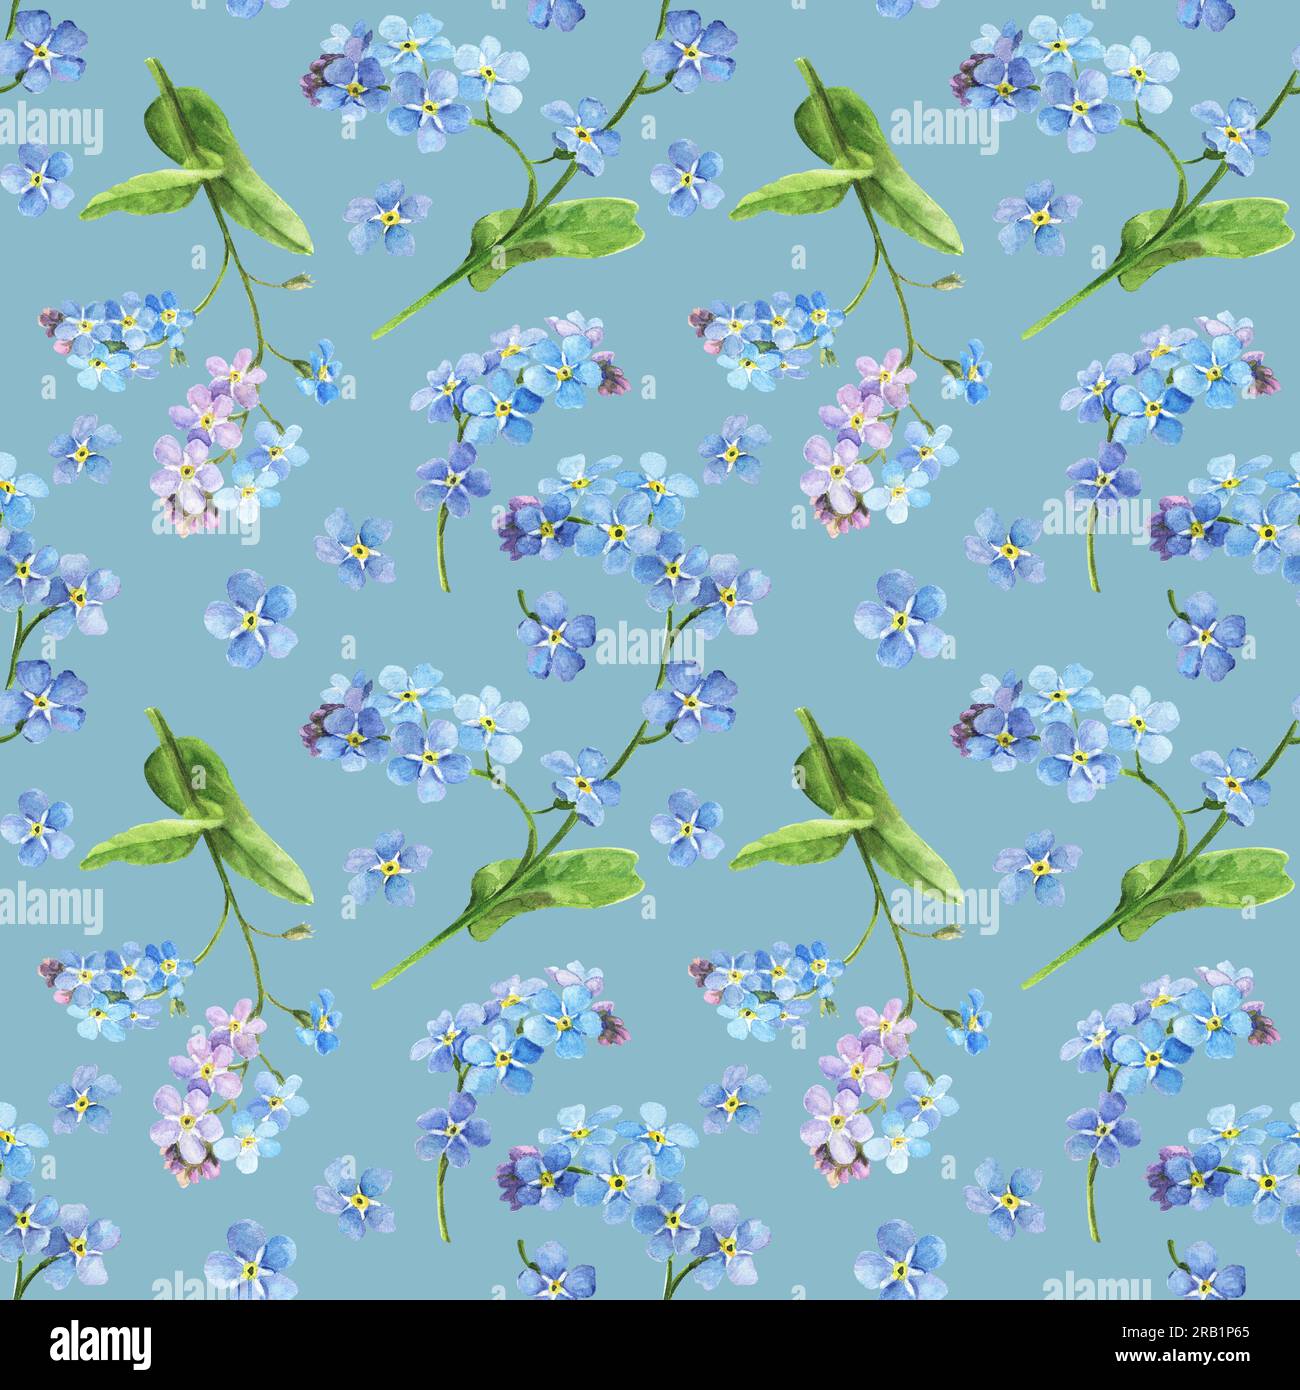 Watercolor seamless pattern with forget me nots, botanical illustration. Perfect for greeting cards, covers, prints, patterns Stock Photo